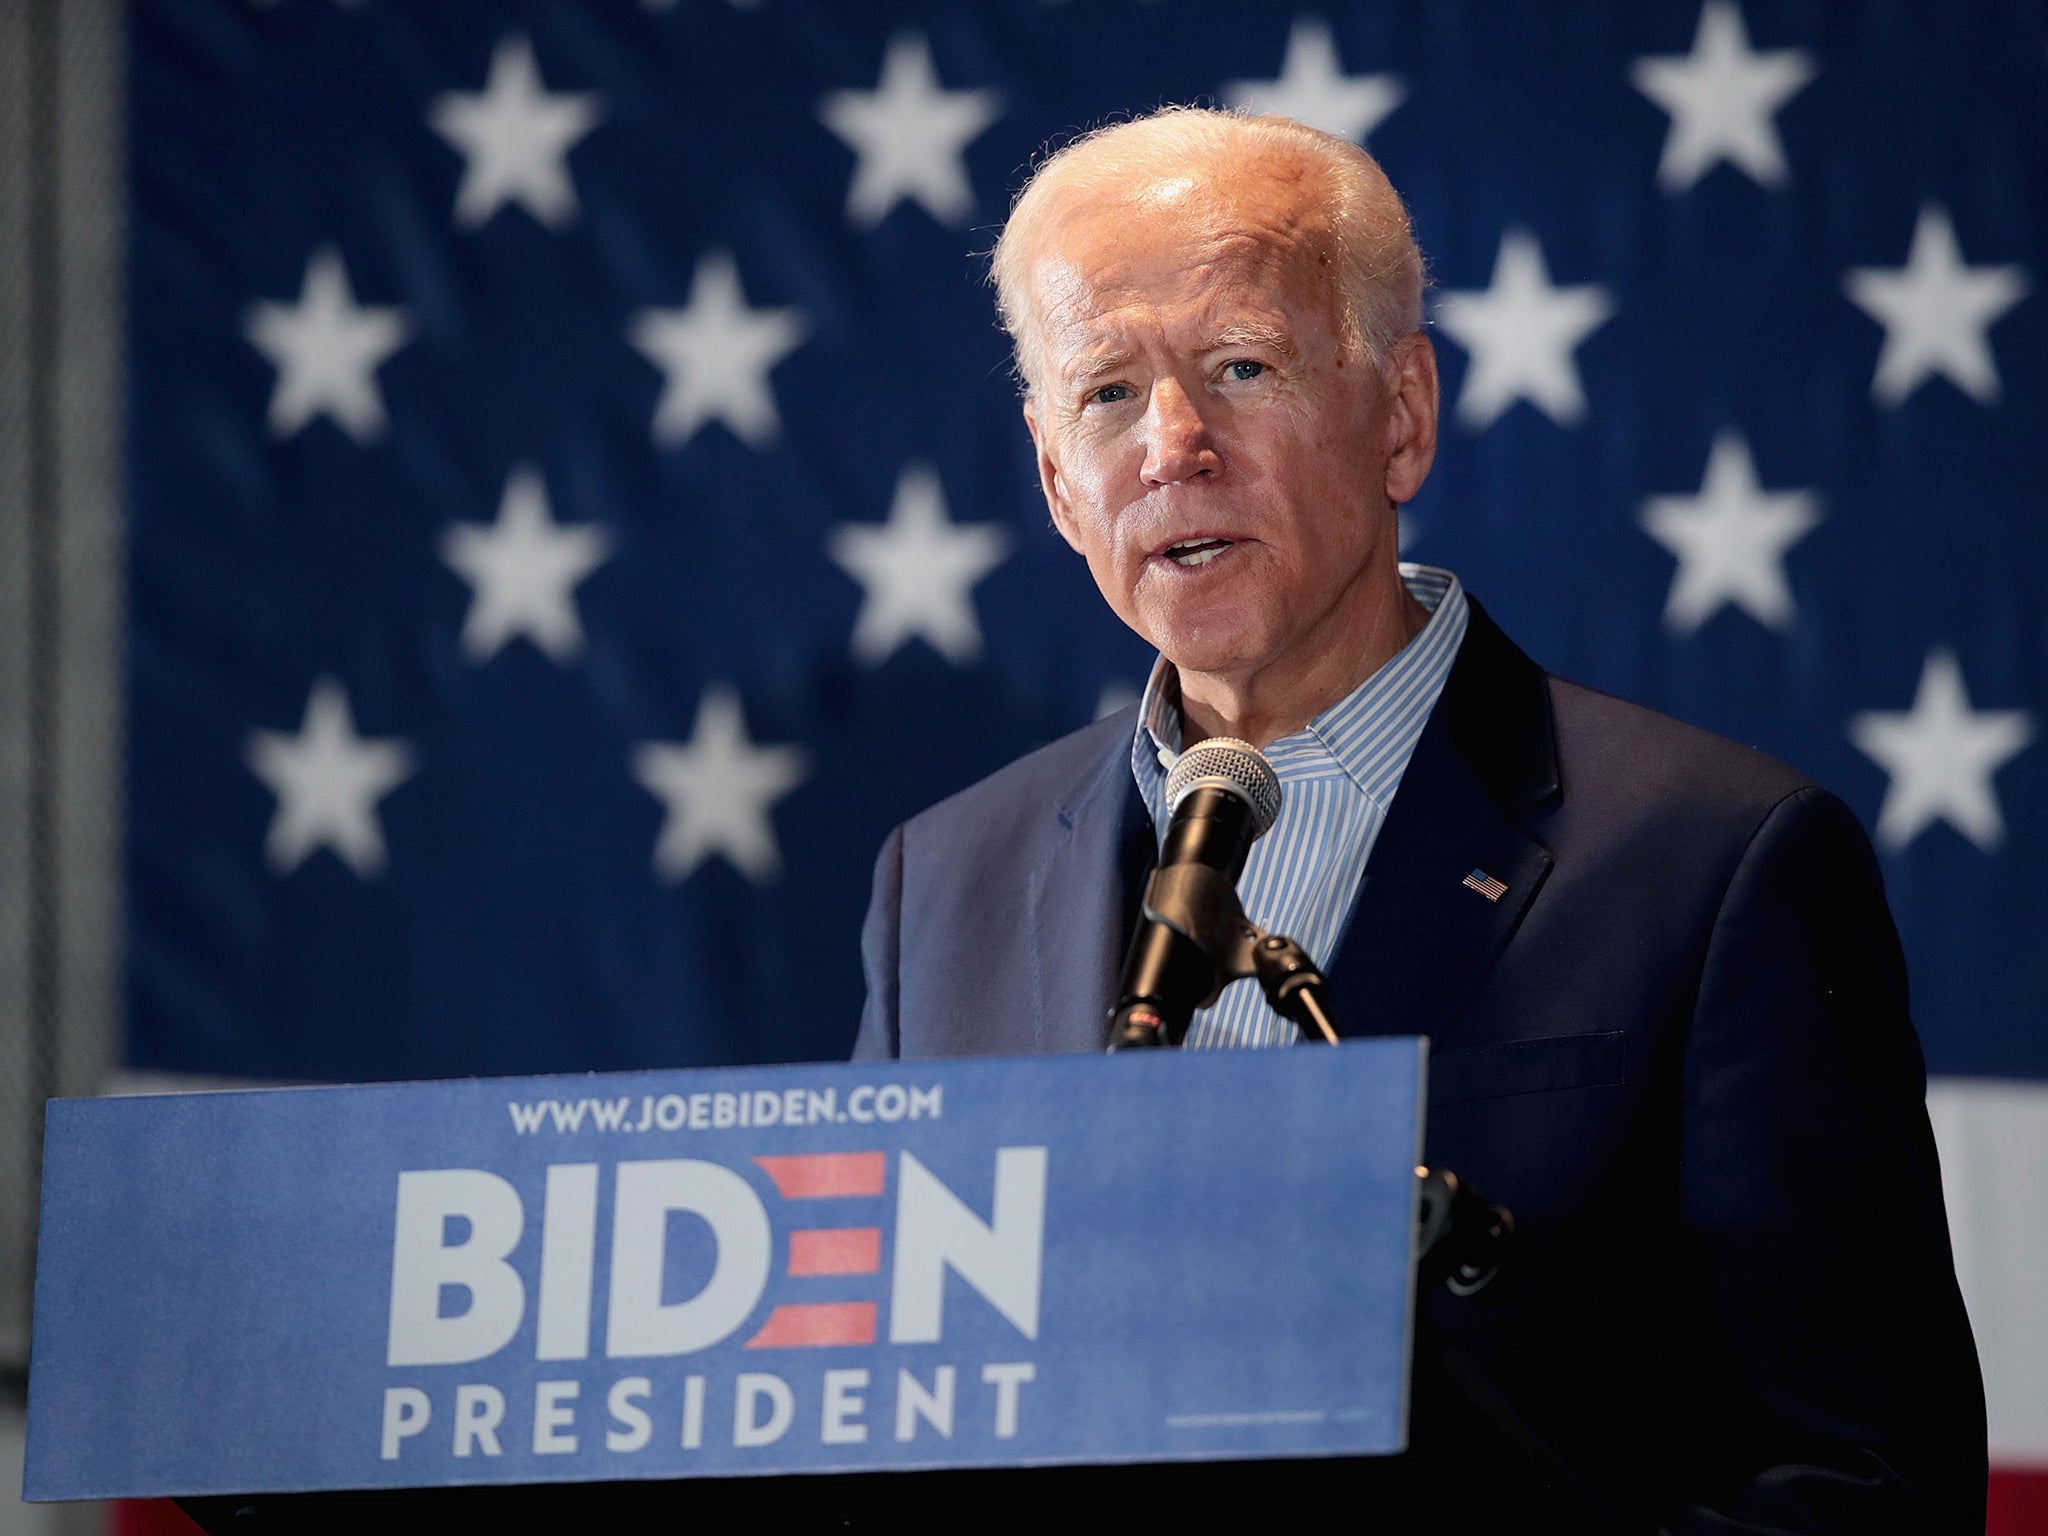 Joe Biden has hit out after Texas became the latest state – after Florida and Georgia – to try and push through restrictions